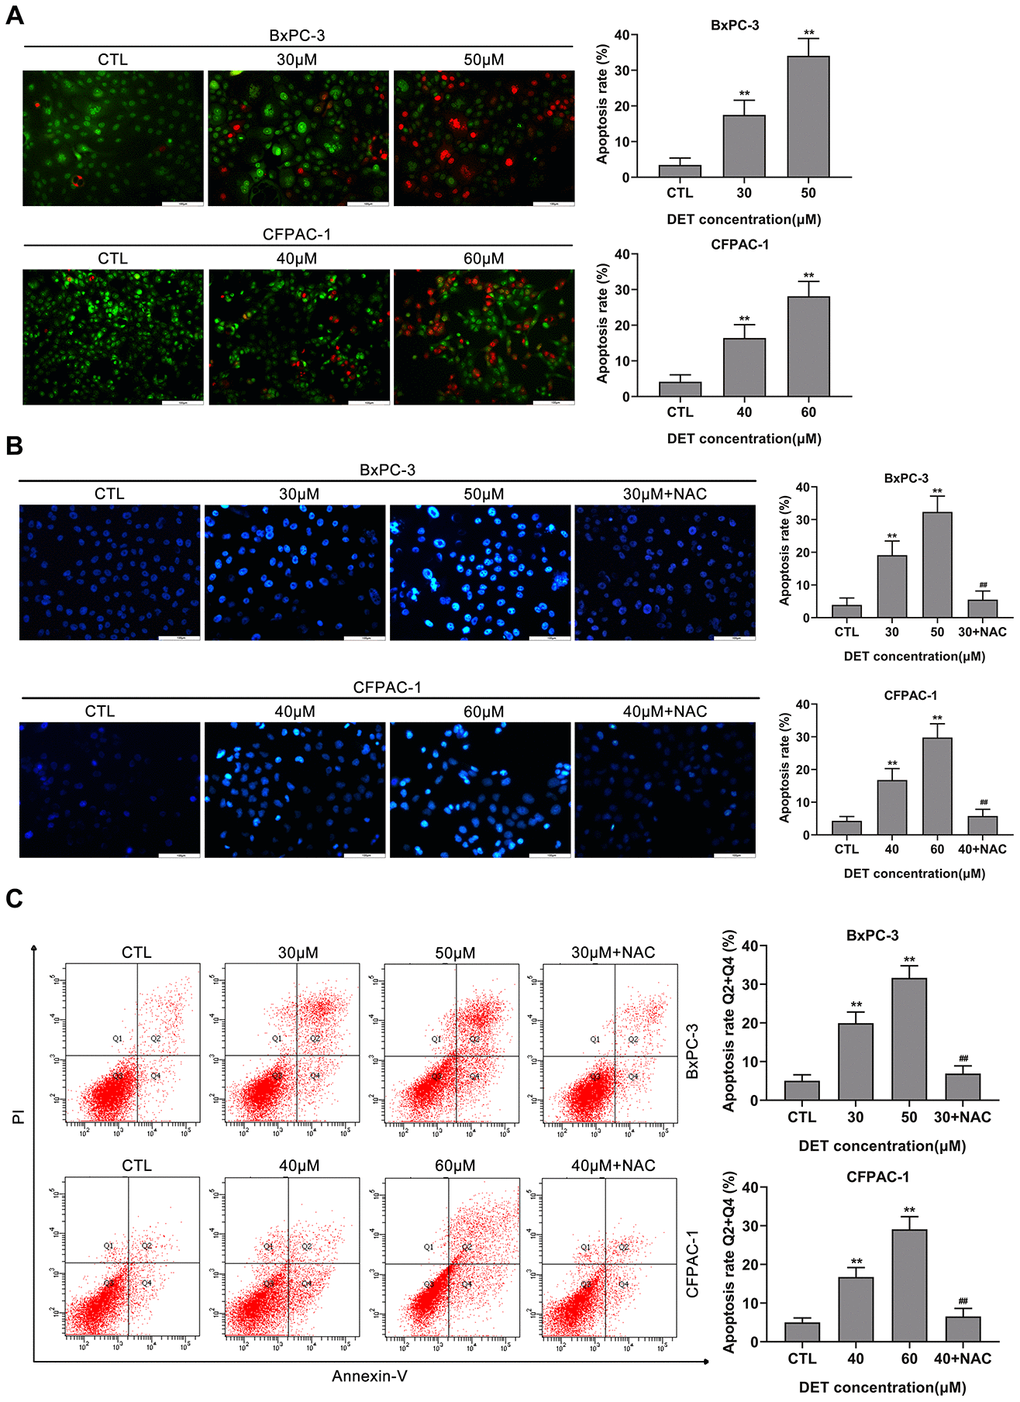 DET induced apoptosis in BxPC-3 and CFPAC-1 cells in vitro. (A) DET-induced apoptosis in BxPC-3 and CFPAC-1 cells were tested using AO/EB double staining assay. **P B) DET-induced apoptosis in BxPC-3 and CFPAC-1 cells were assessed using Hoechst 33342 staining. **P P C) DET-induced apoptosis in BxPC-3 and CFPAC-1 cells were determined using Annexin V-FITC/PI double staining. Annexin V-FITC (-) and PI (-) cells were defined as alive, Annexin V-FITC (+) but PI (-) cells were defined as early apoptosis, Annexin V-FITC (+) but PI (+) cells were considered to be late apoptosis. Annexin V-FITC (-) and PI (+) cells were thought to be necrotic cells. The total apoptosis rate was the sum of early apoptosis rate and late apoptosis rate. **P P A, B). Scale bar, 100 μm (A, B).